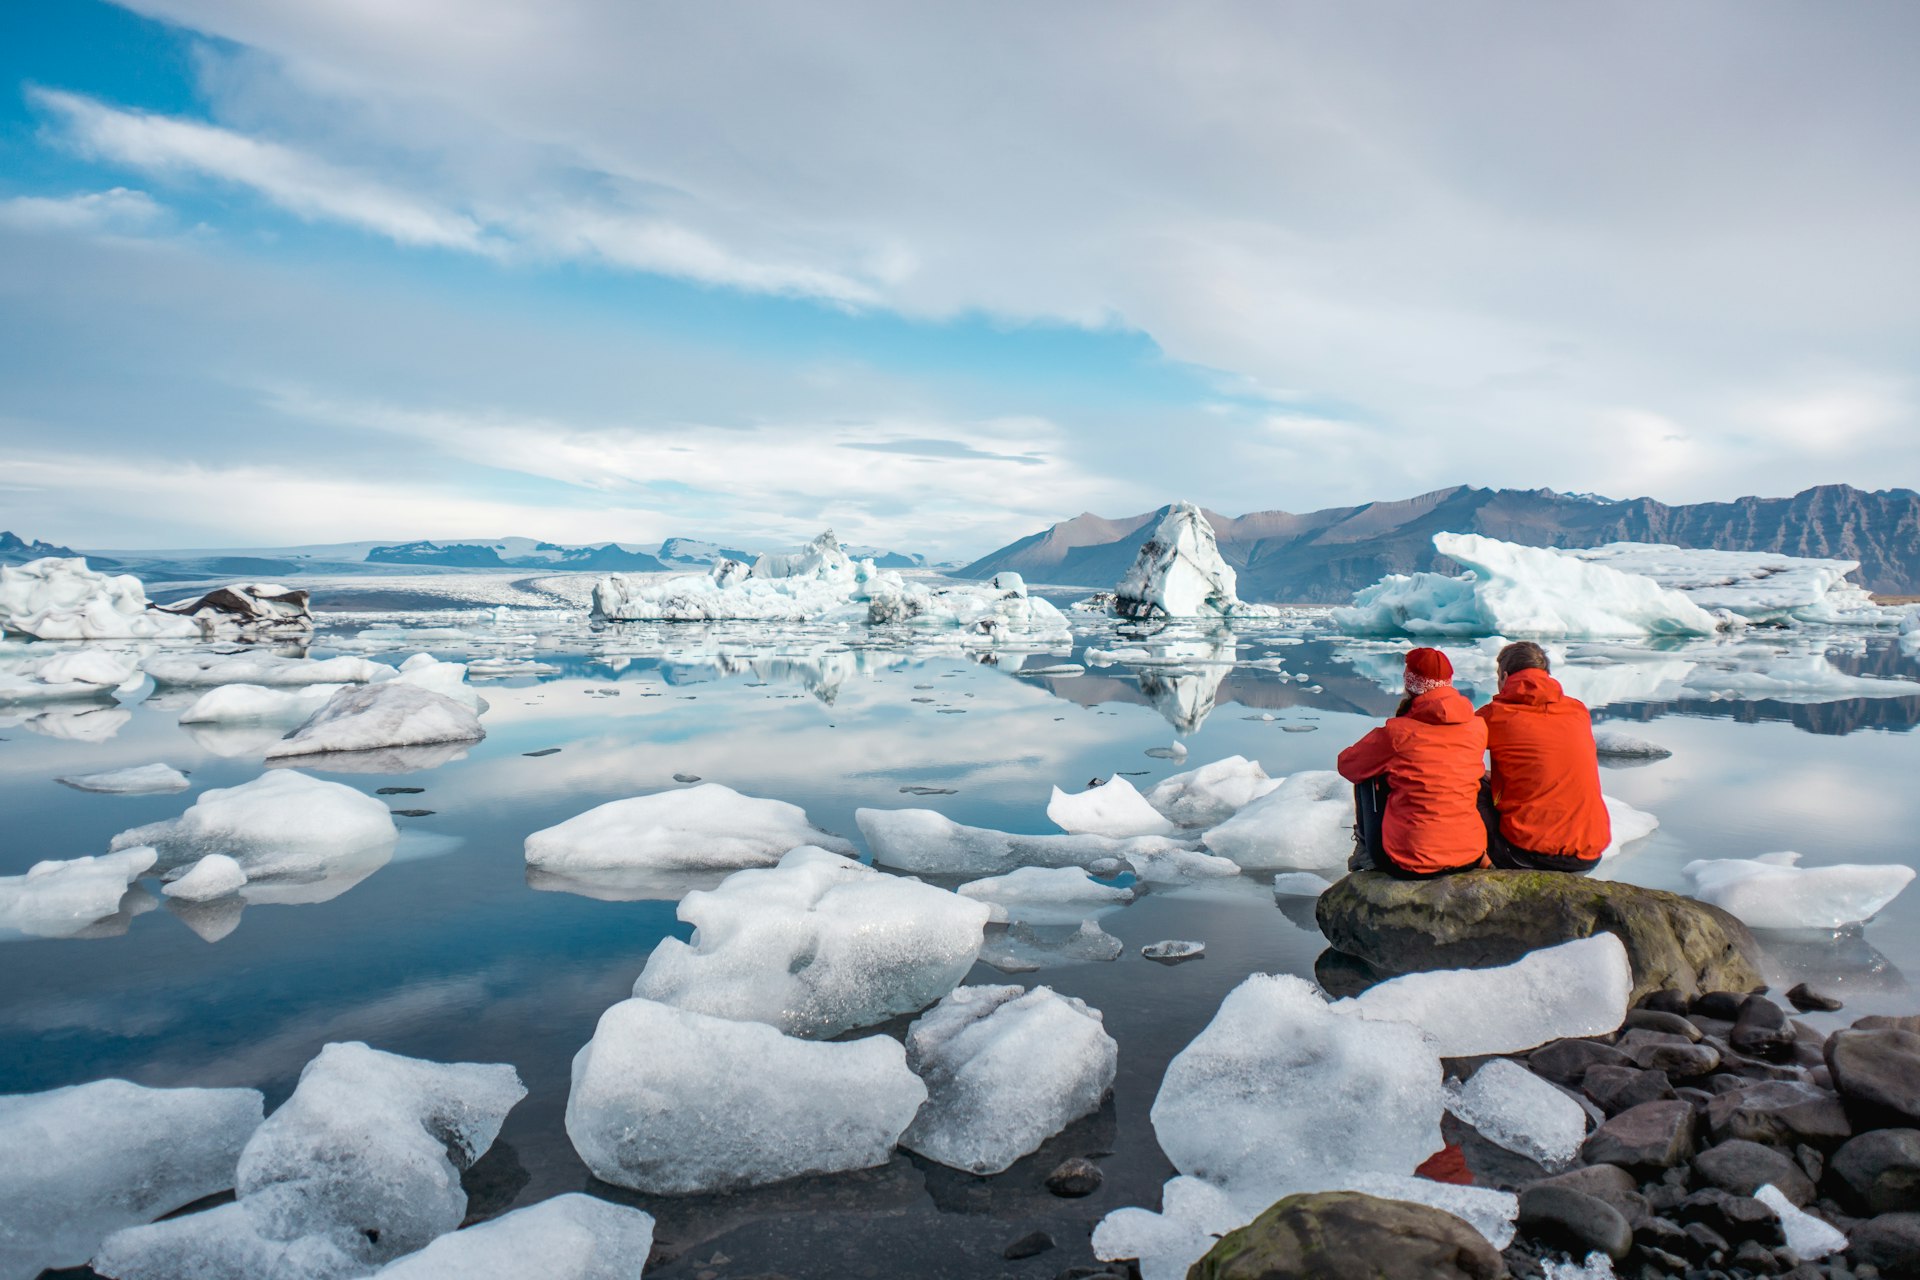 A couple sit on the edge of a lagoon filled with icebergs 